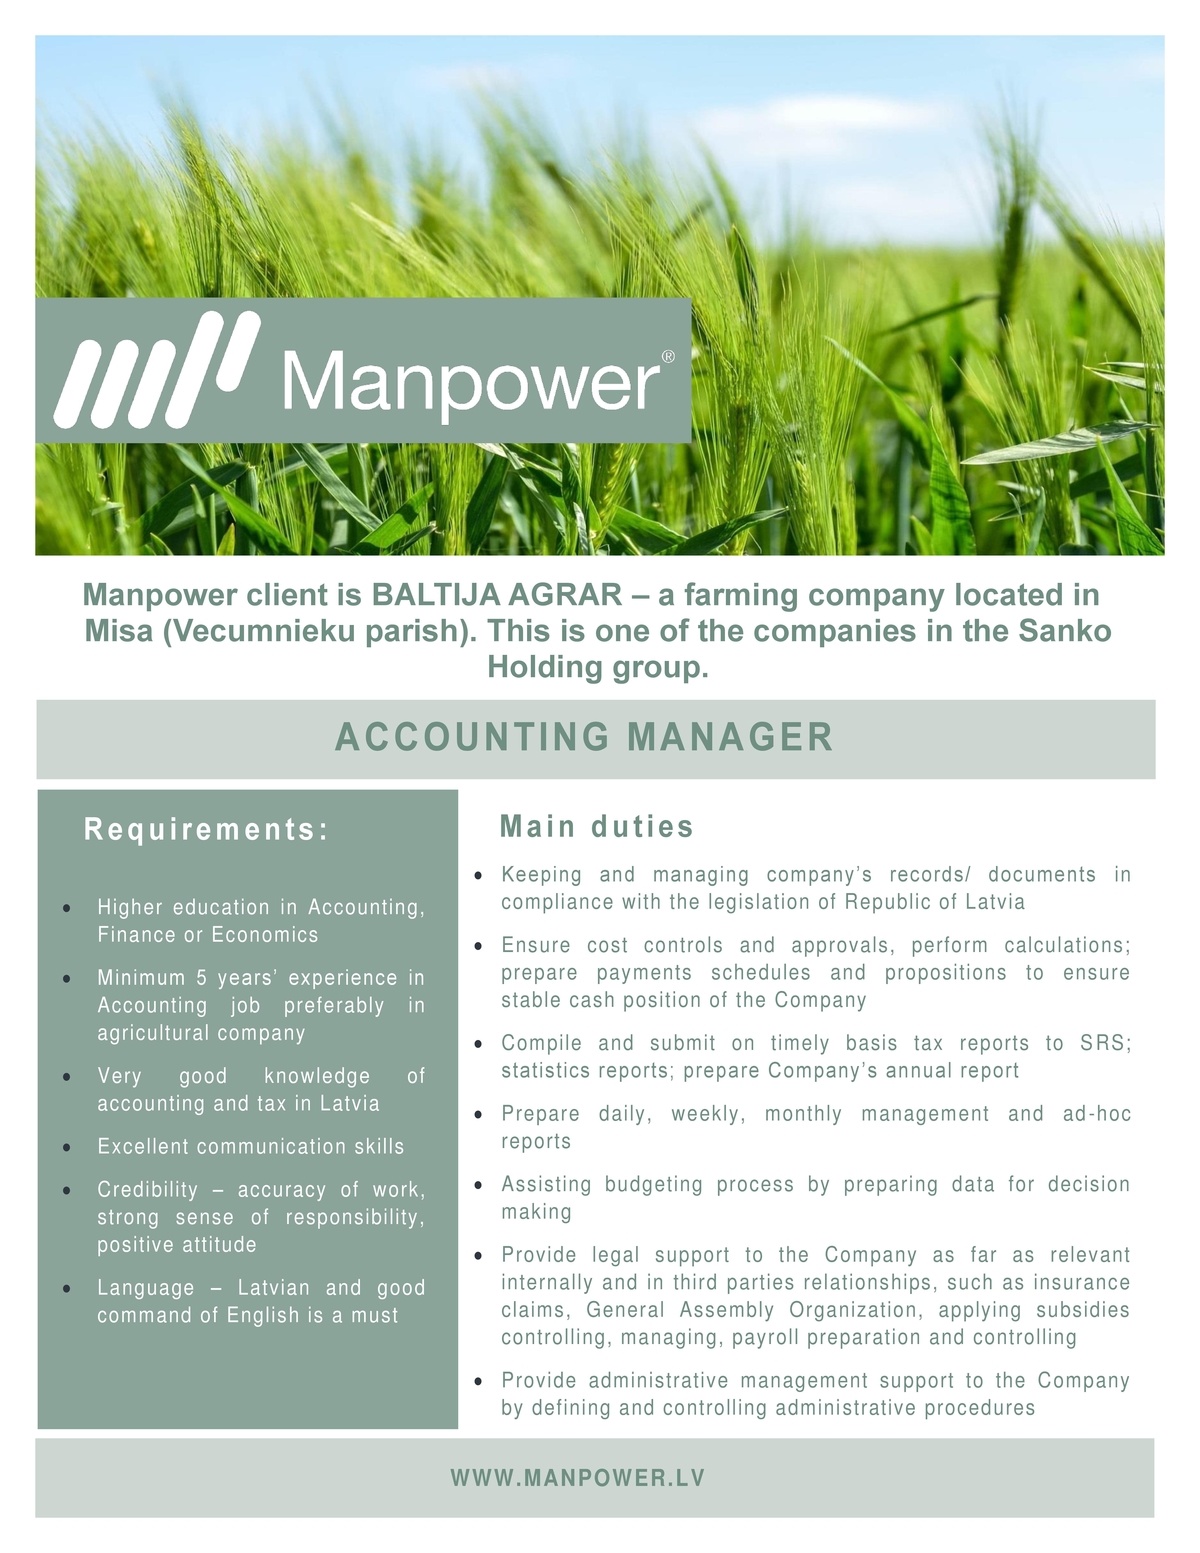 MANPOWER ACCOUNTING MANAGER